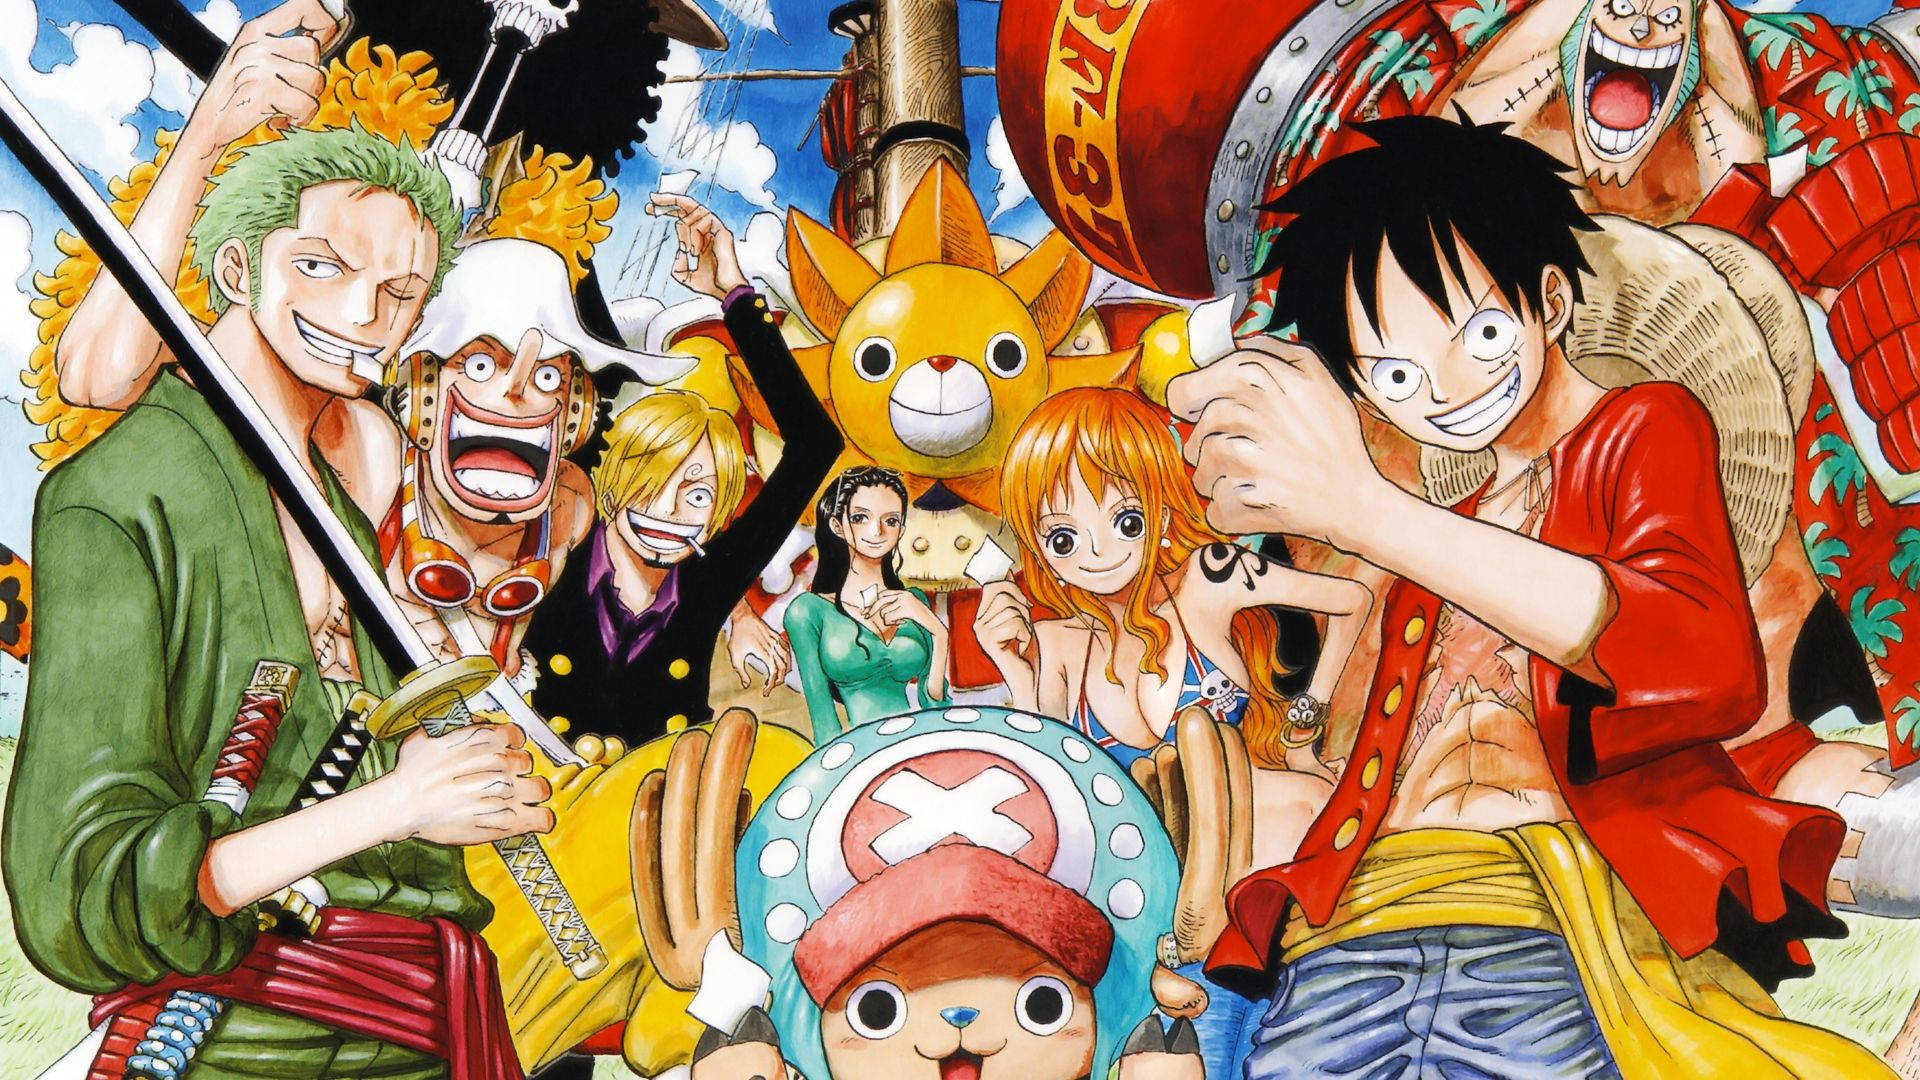 Free One Piece Wallpaper Downloads, One Piece Wallpaper for FREE